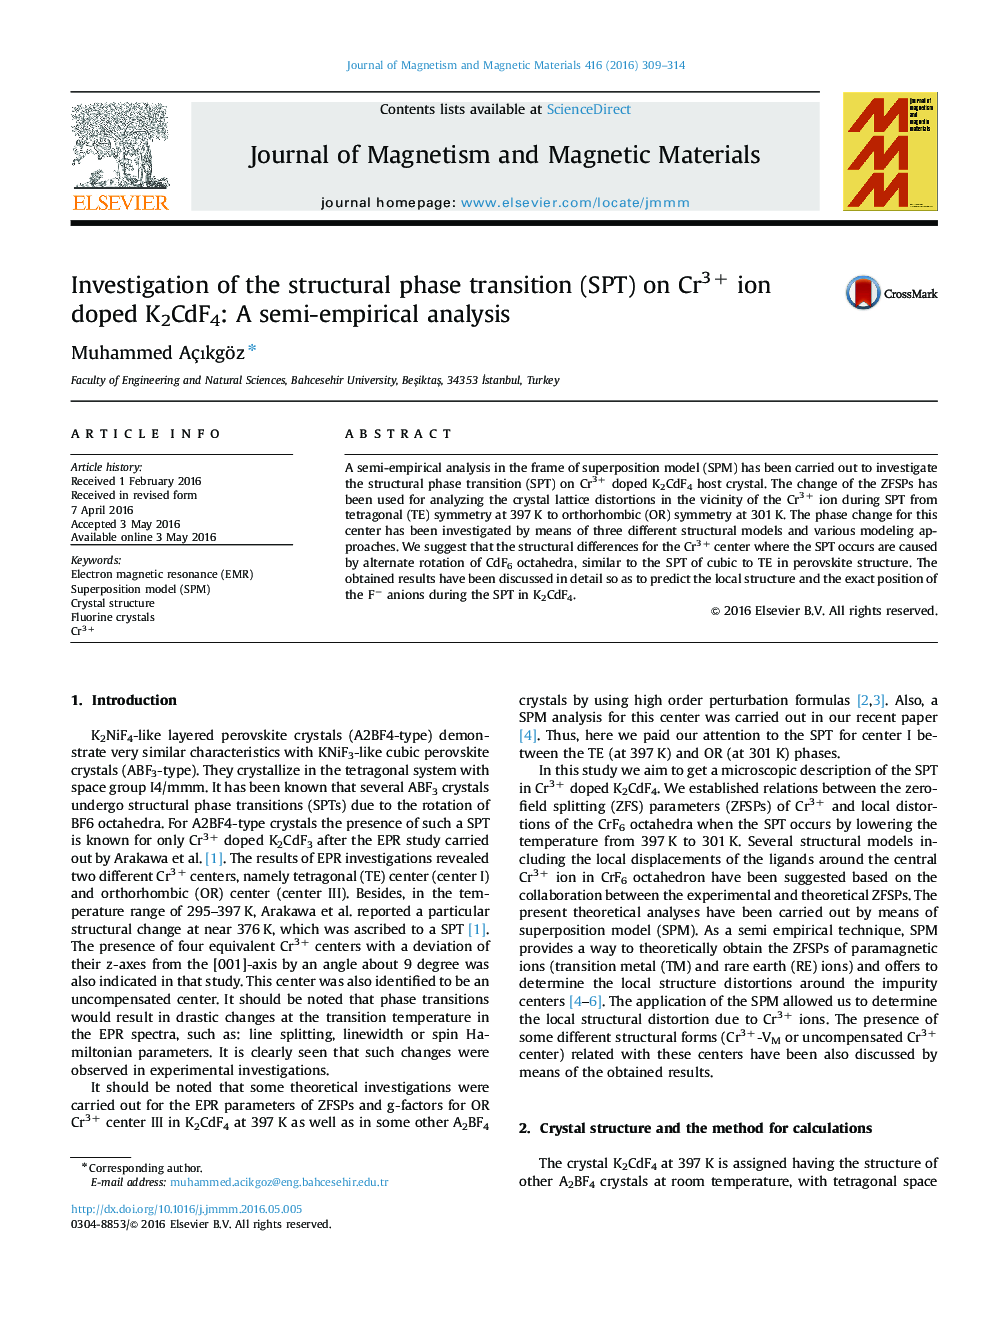 Investigation of the structural phase transition (SPT) on Cr3+ ion doped K2CdF4: A semi-empirical analysis